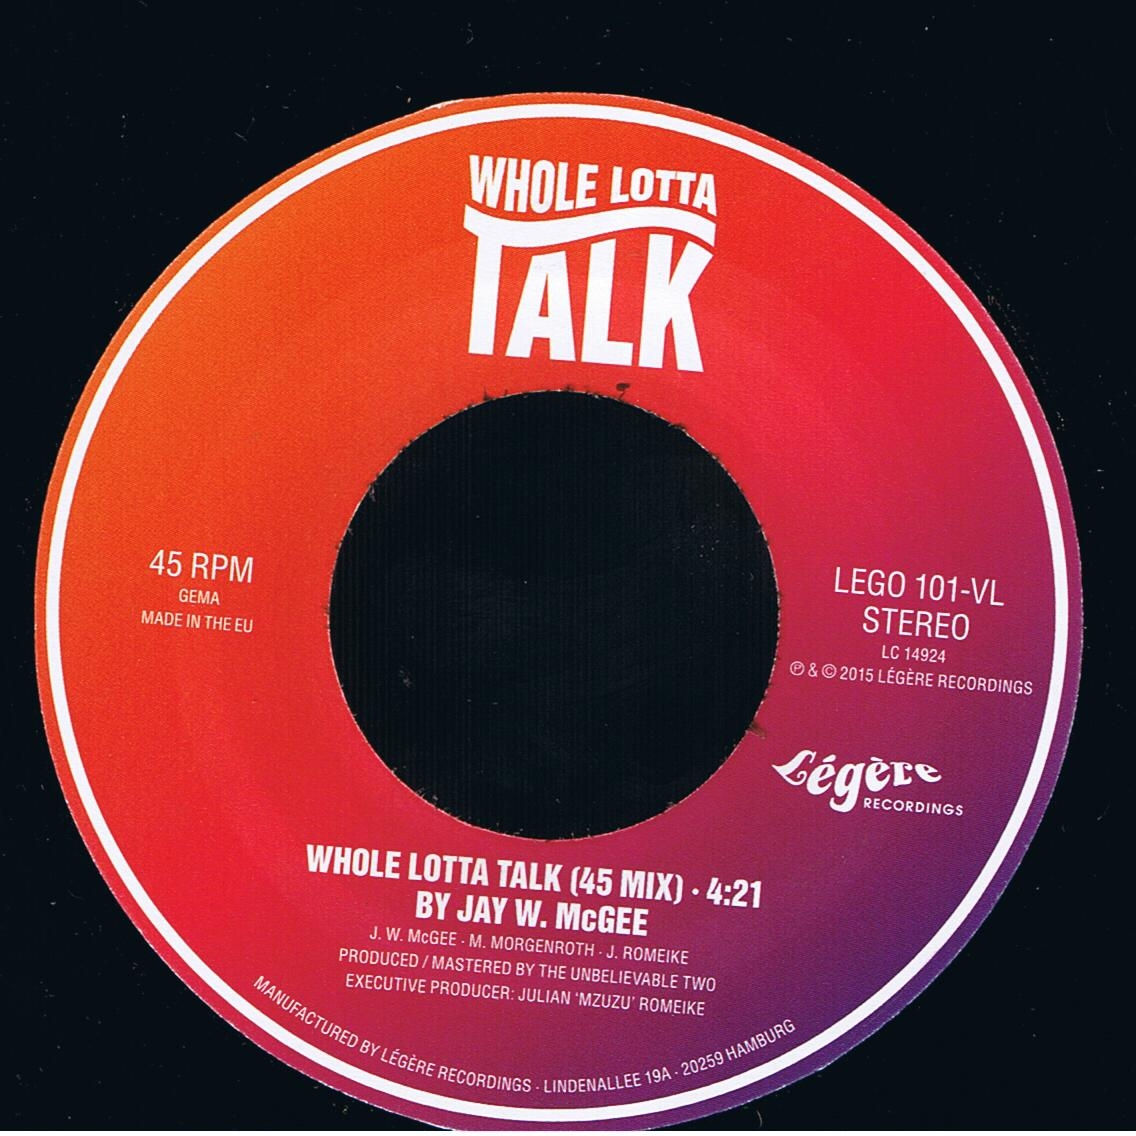 Jay W. McGee - Whole Lotta Talk(45Mix) / Jay W. McGee - Let's Fall In Love (Austin Boogie Crew Remix) (7")